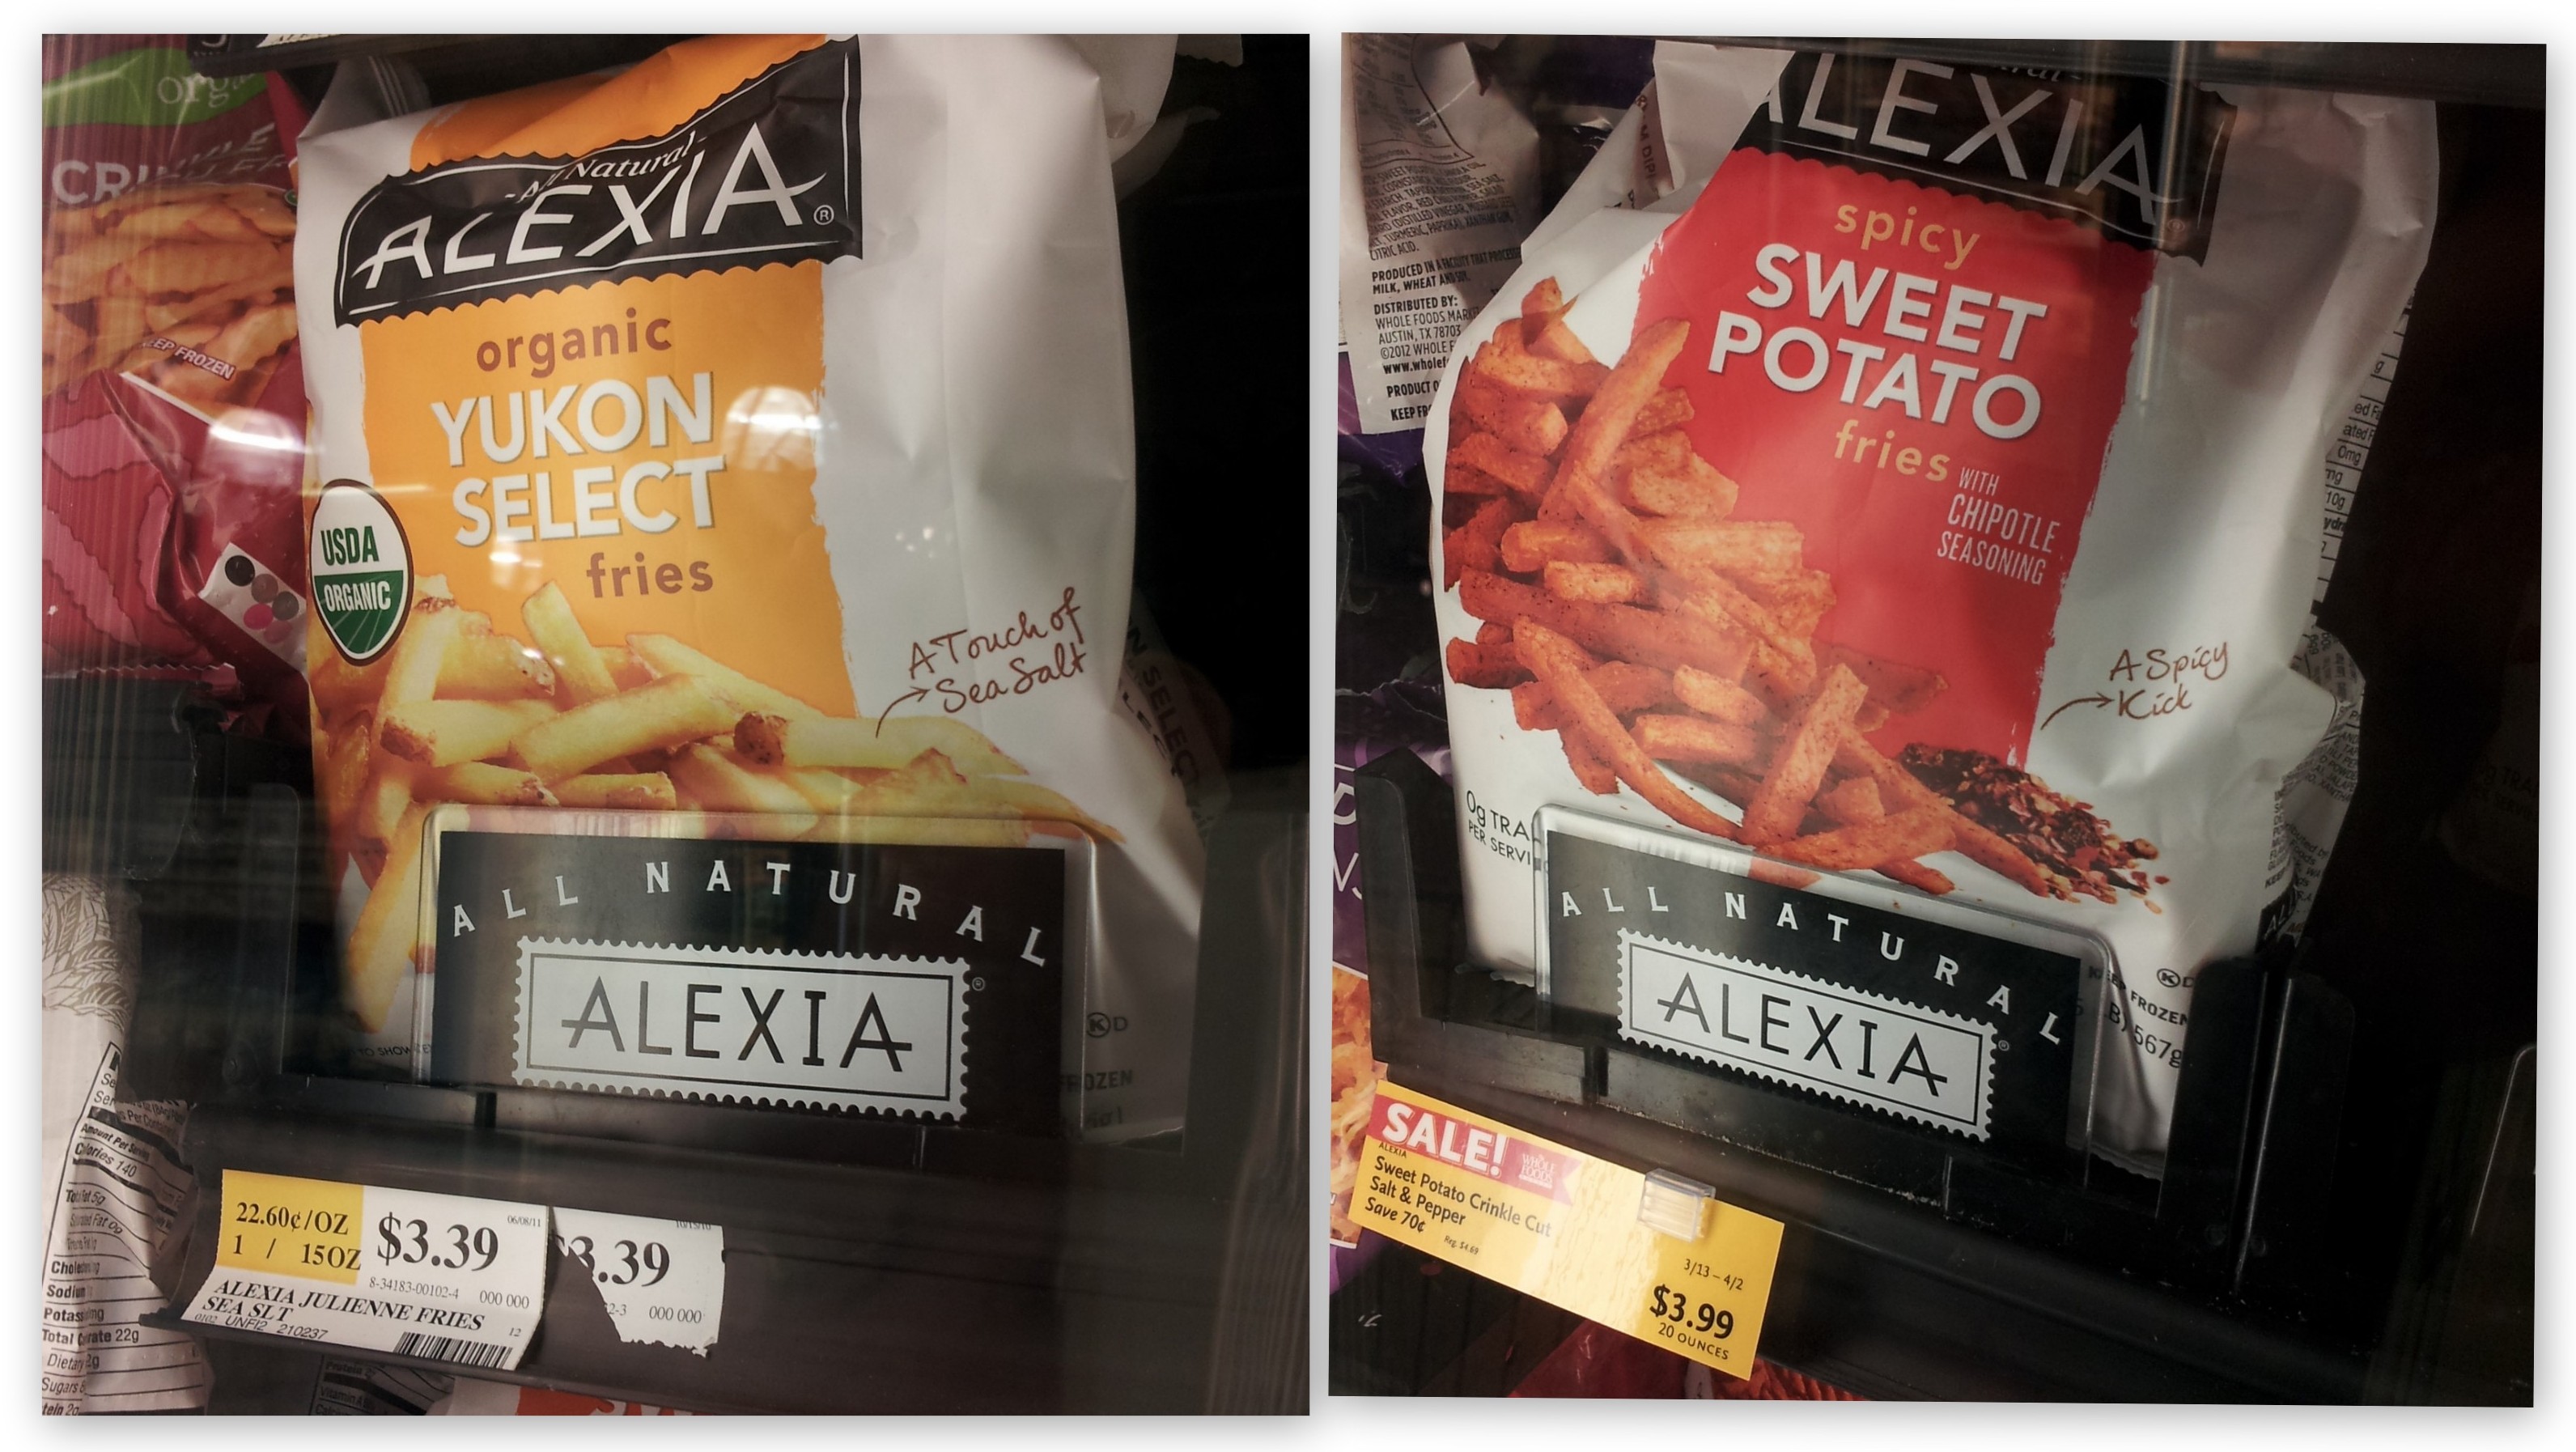 $2.50/1 Alexia Potatoes Printable Coupons + Whole Foods and Target Scenario (as low as free)